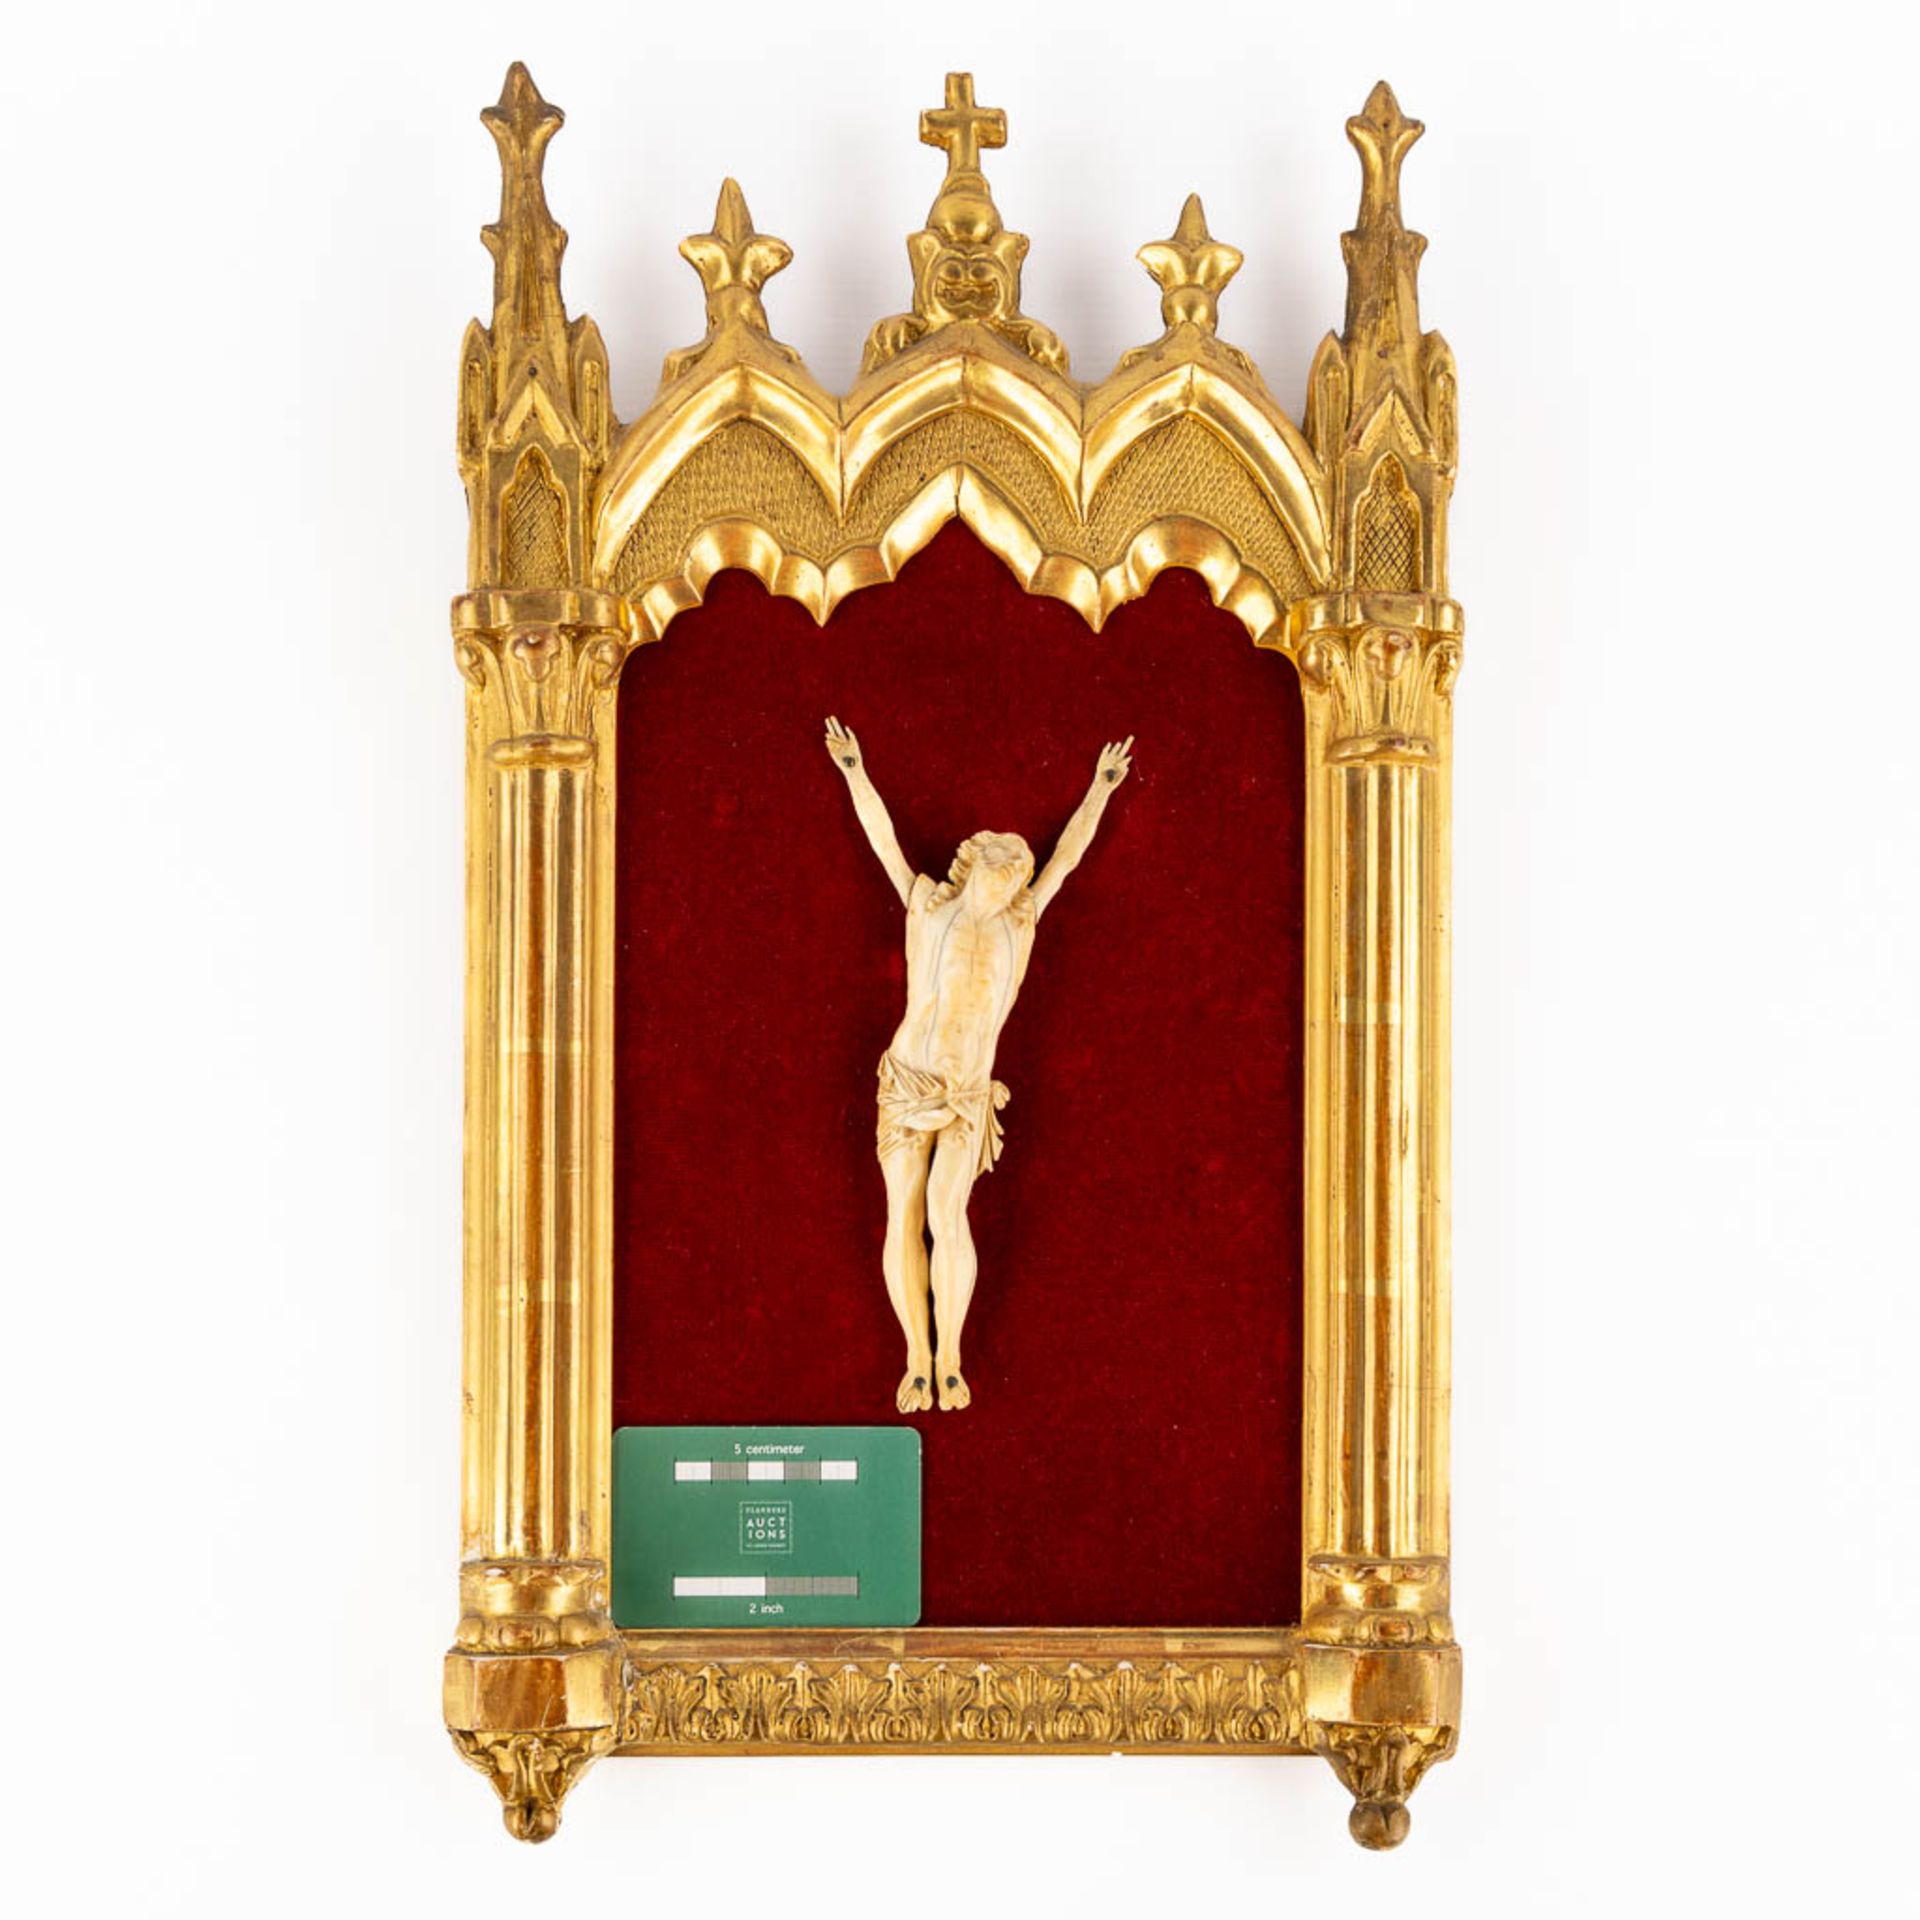 An antique 'Corpus Christi', ivory, mounted in a gilt wood frame, 19th C. (L:2 x W:8,5 x H:19 cm) - Image 2 of 10